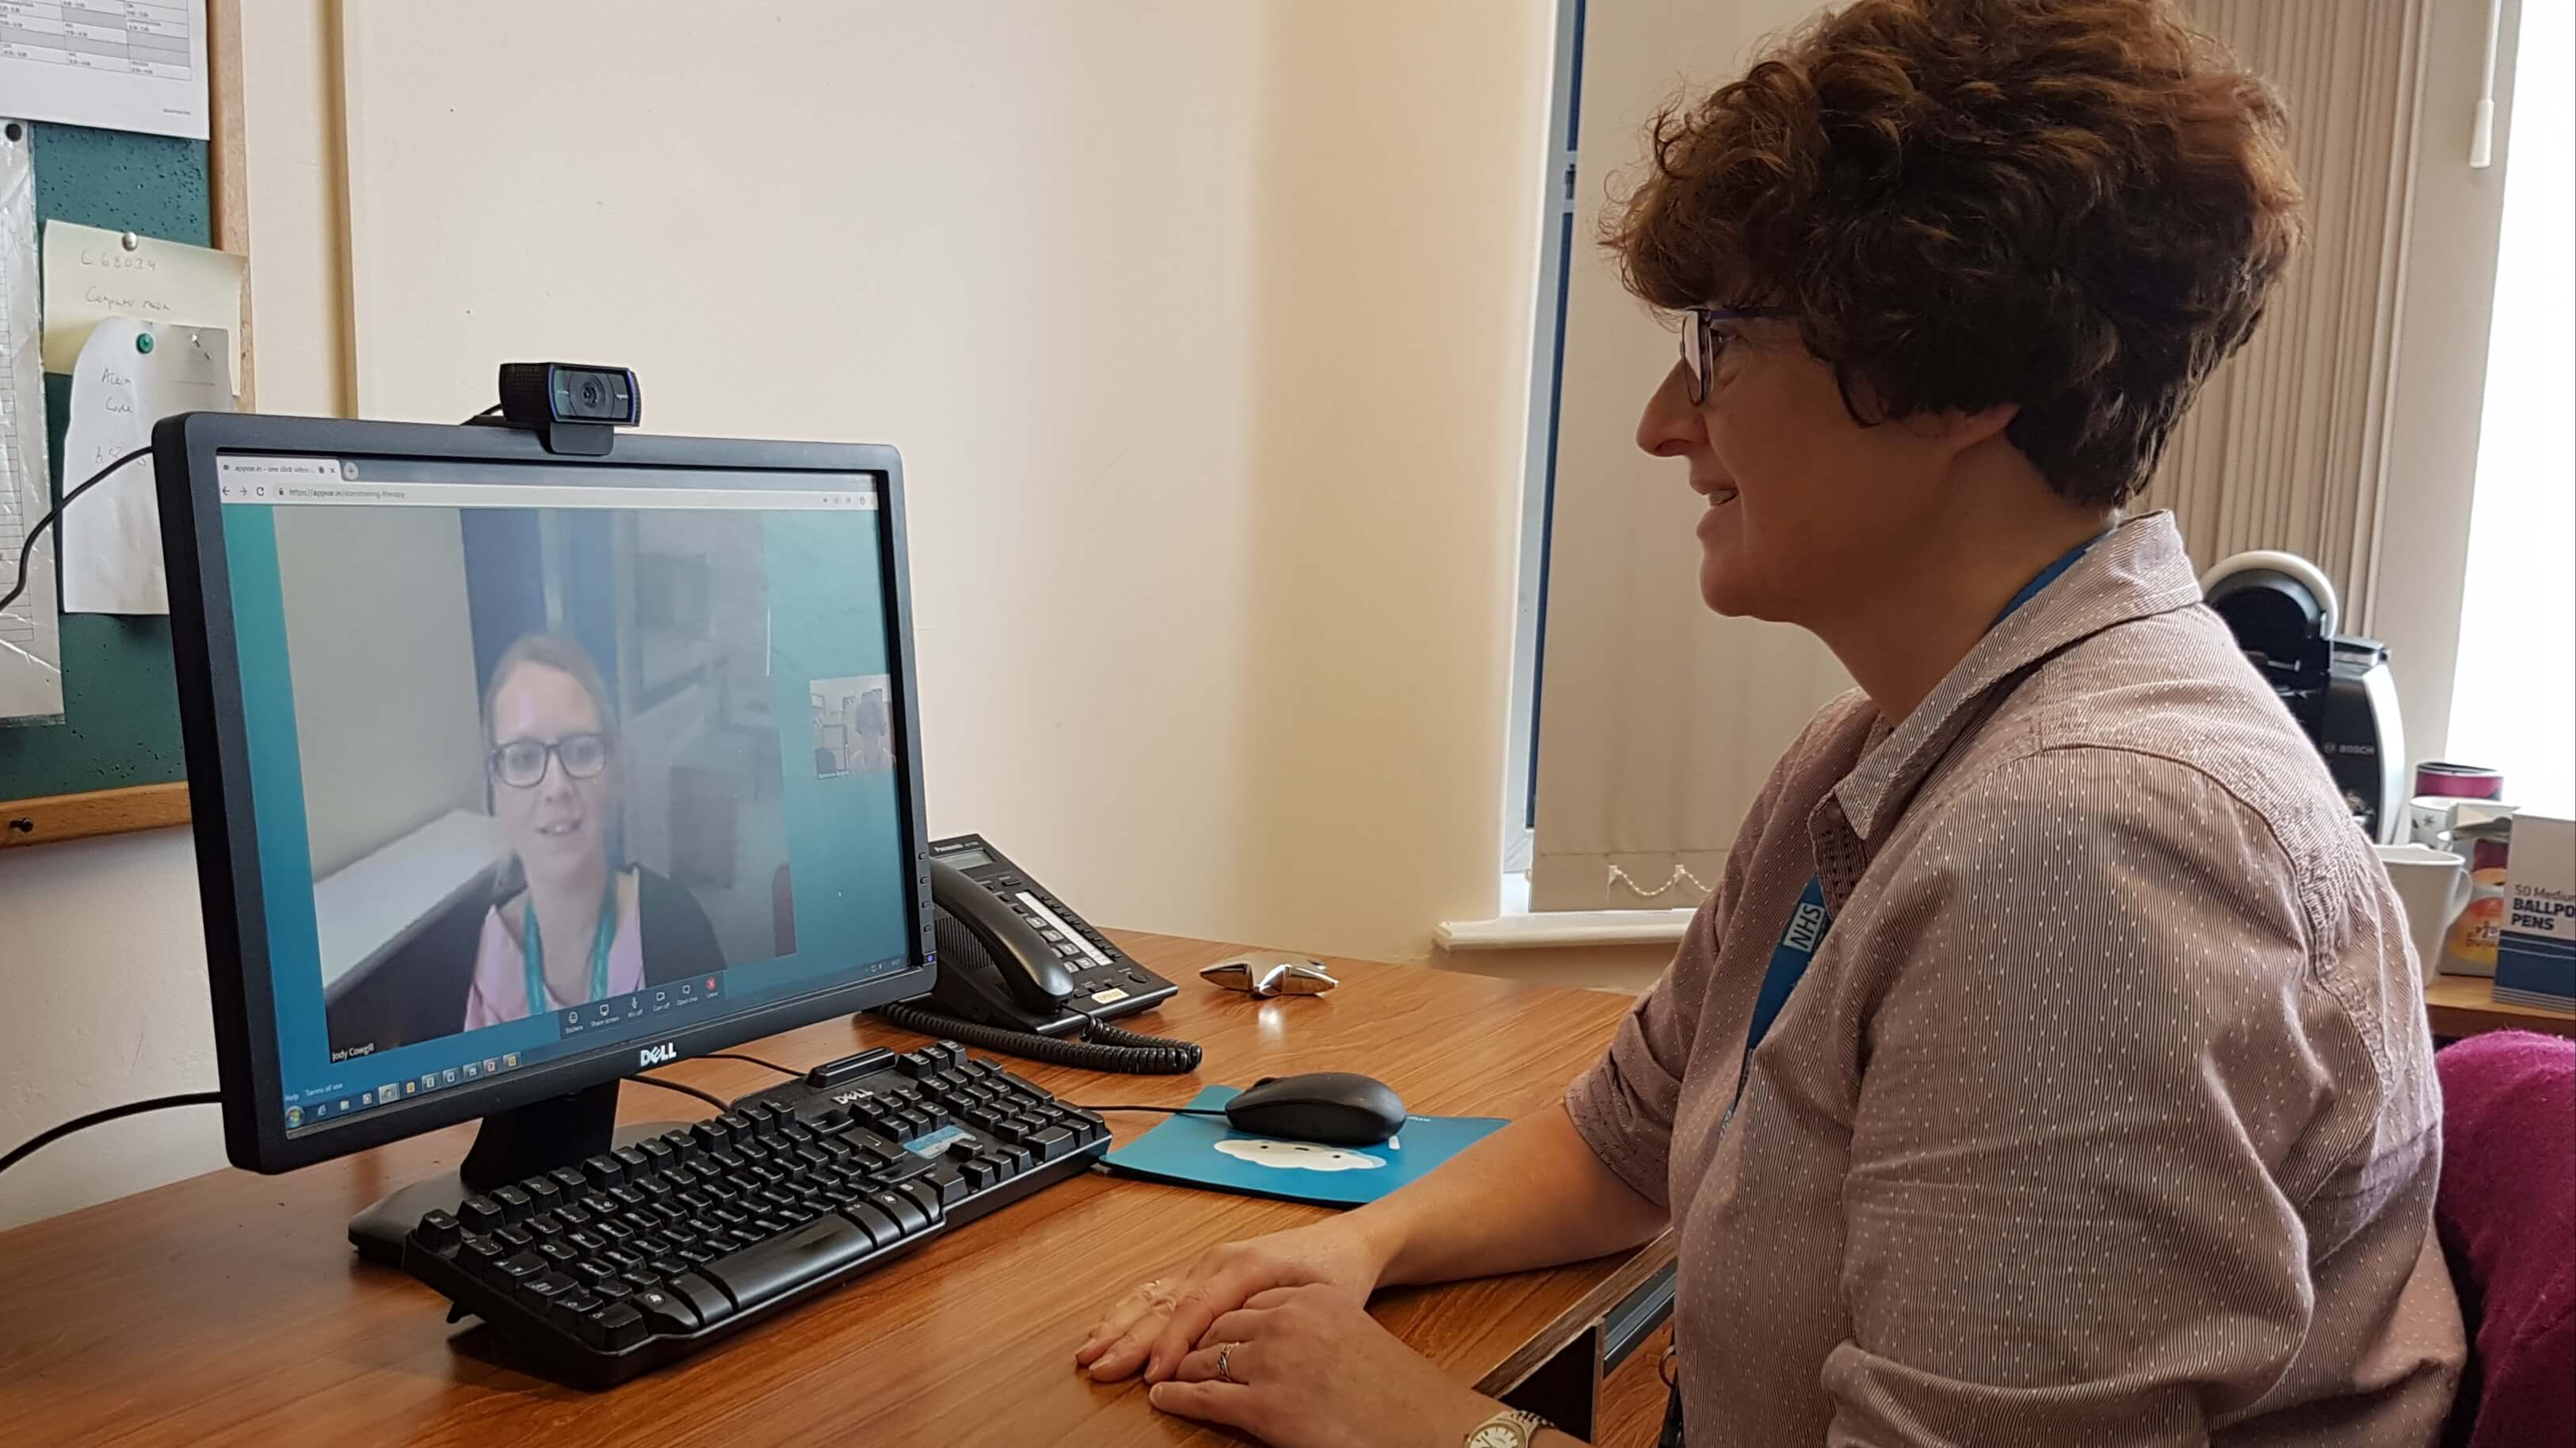 A woman in a therapy setting speaking to someone else via a video call